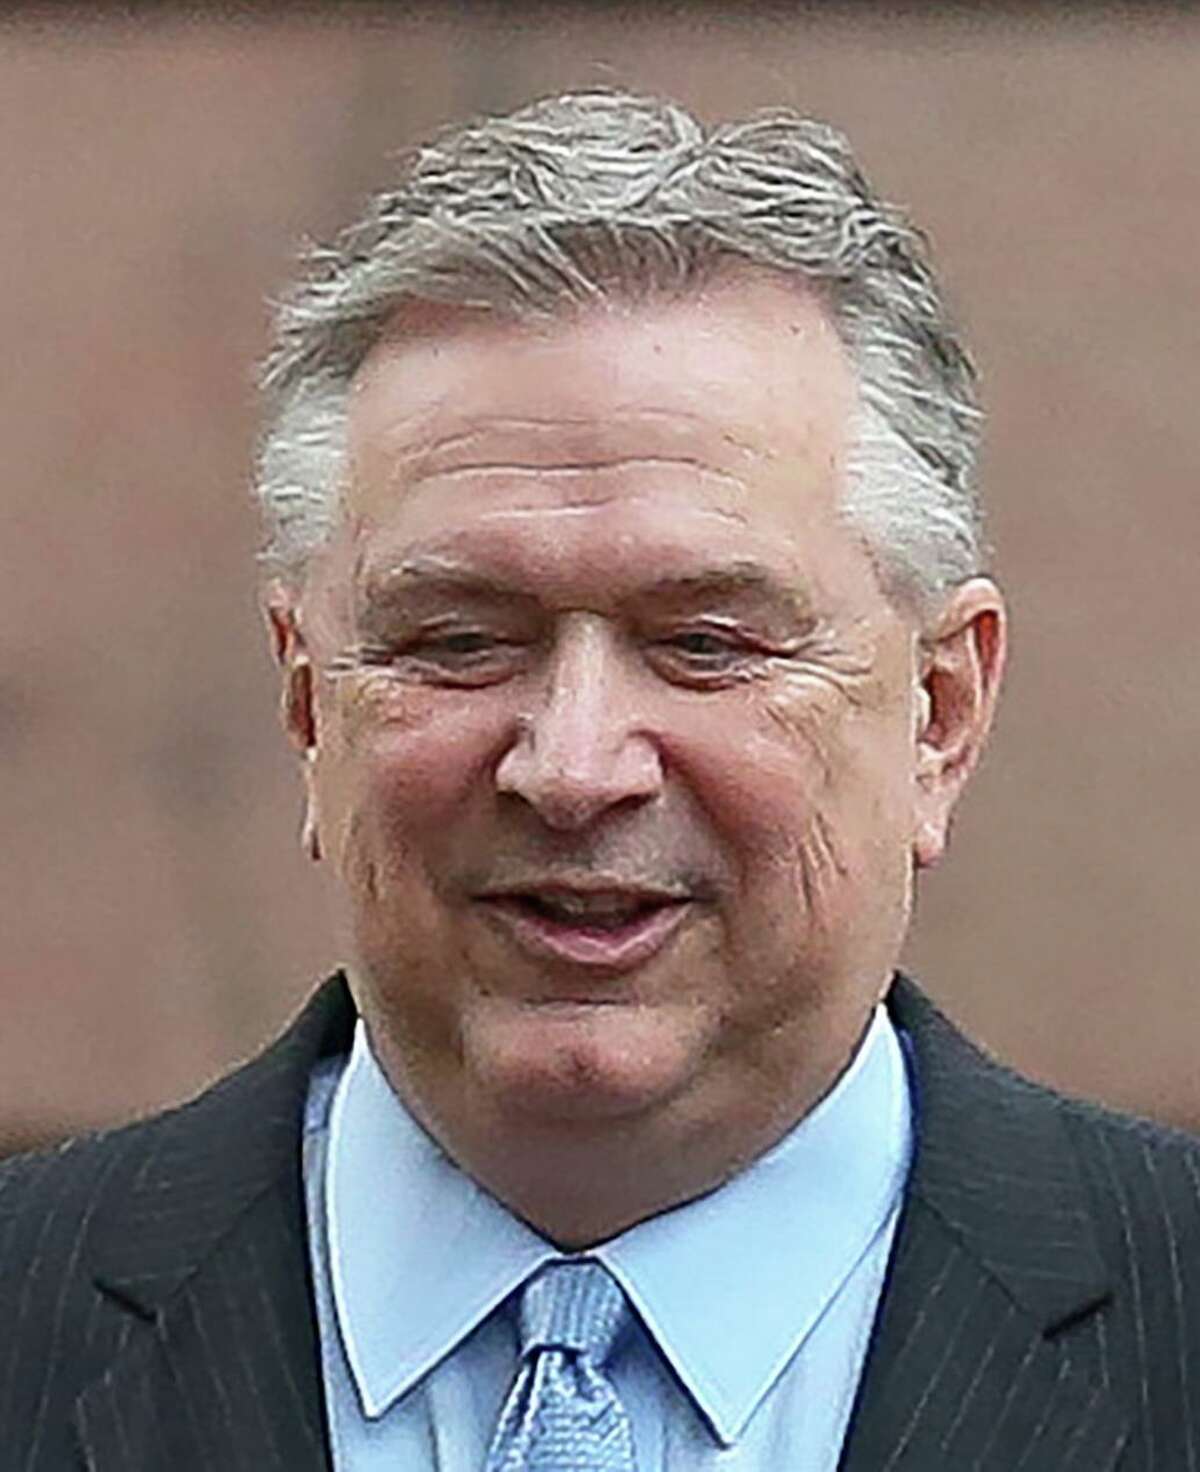 Former U.S. Congressman Steve Stockman walks into the Federal Courthouse for the start of federal corruption trial against Stockman Monday, March 19, 2018, in Houston. ( Godofredo A. Vasquez / Houston Chronicle )